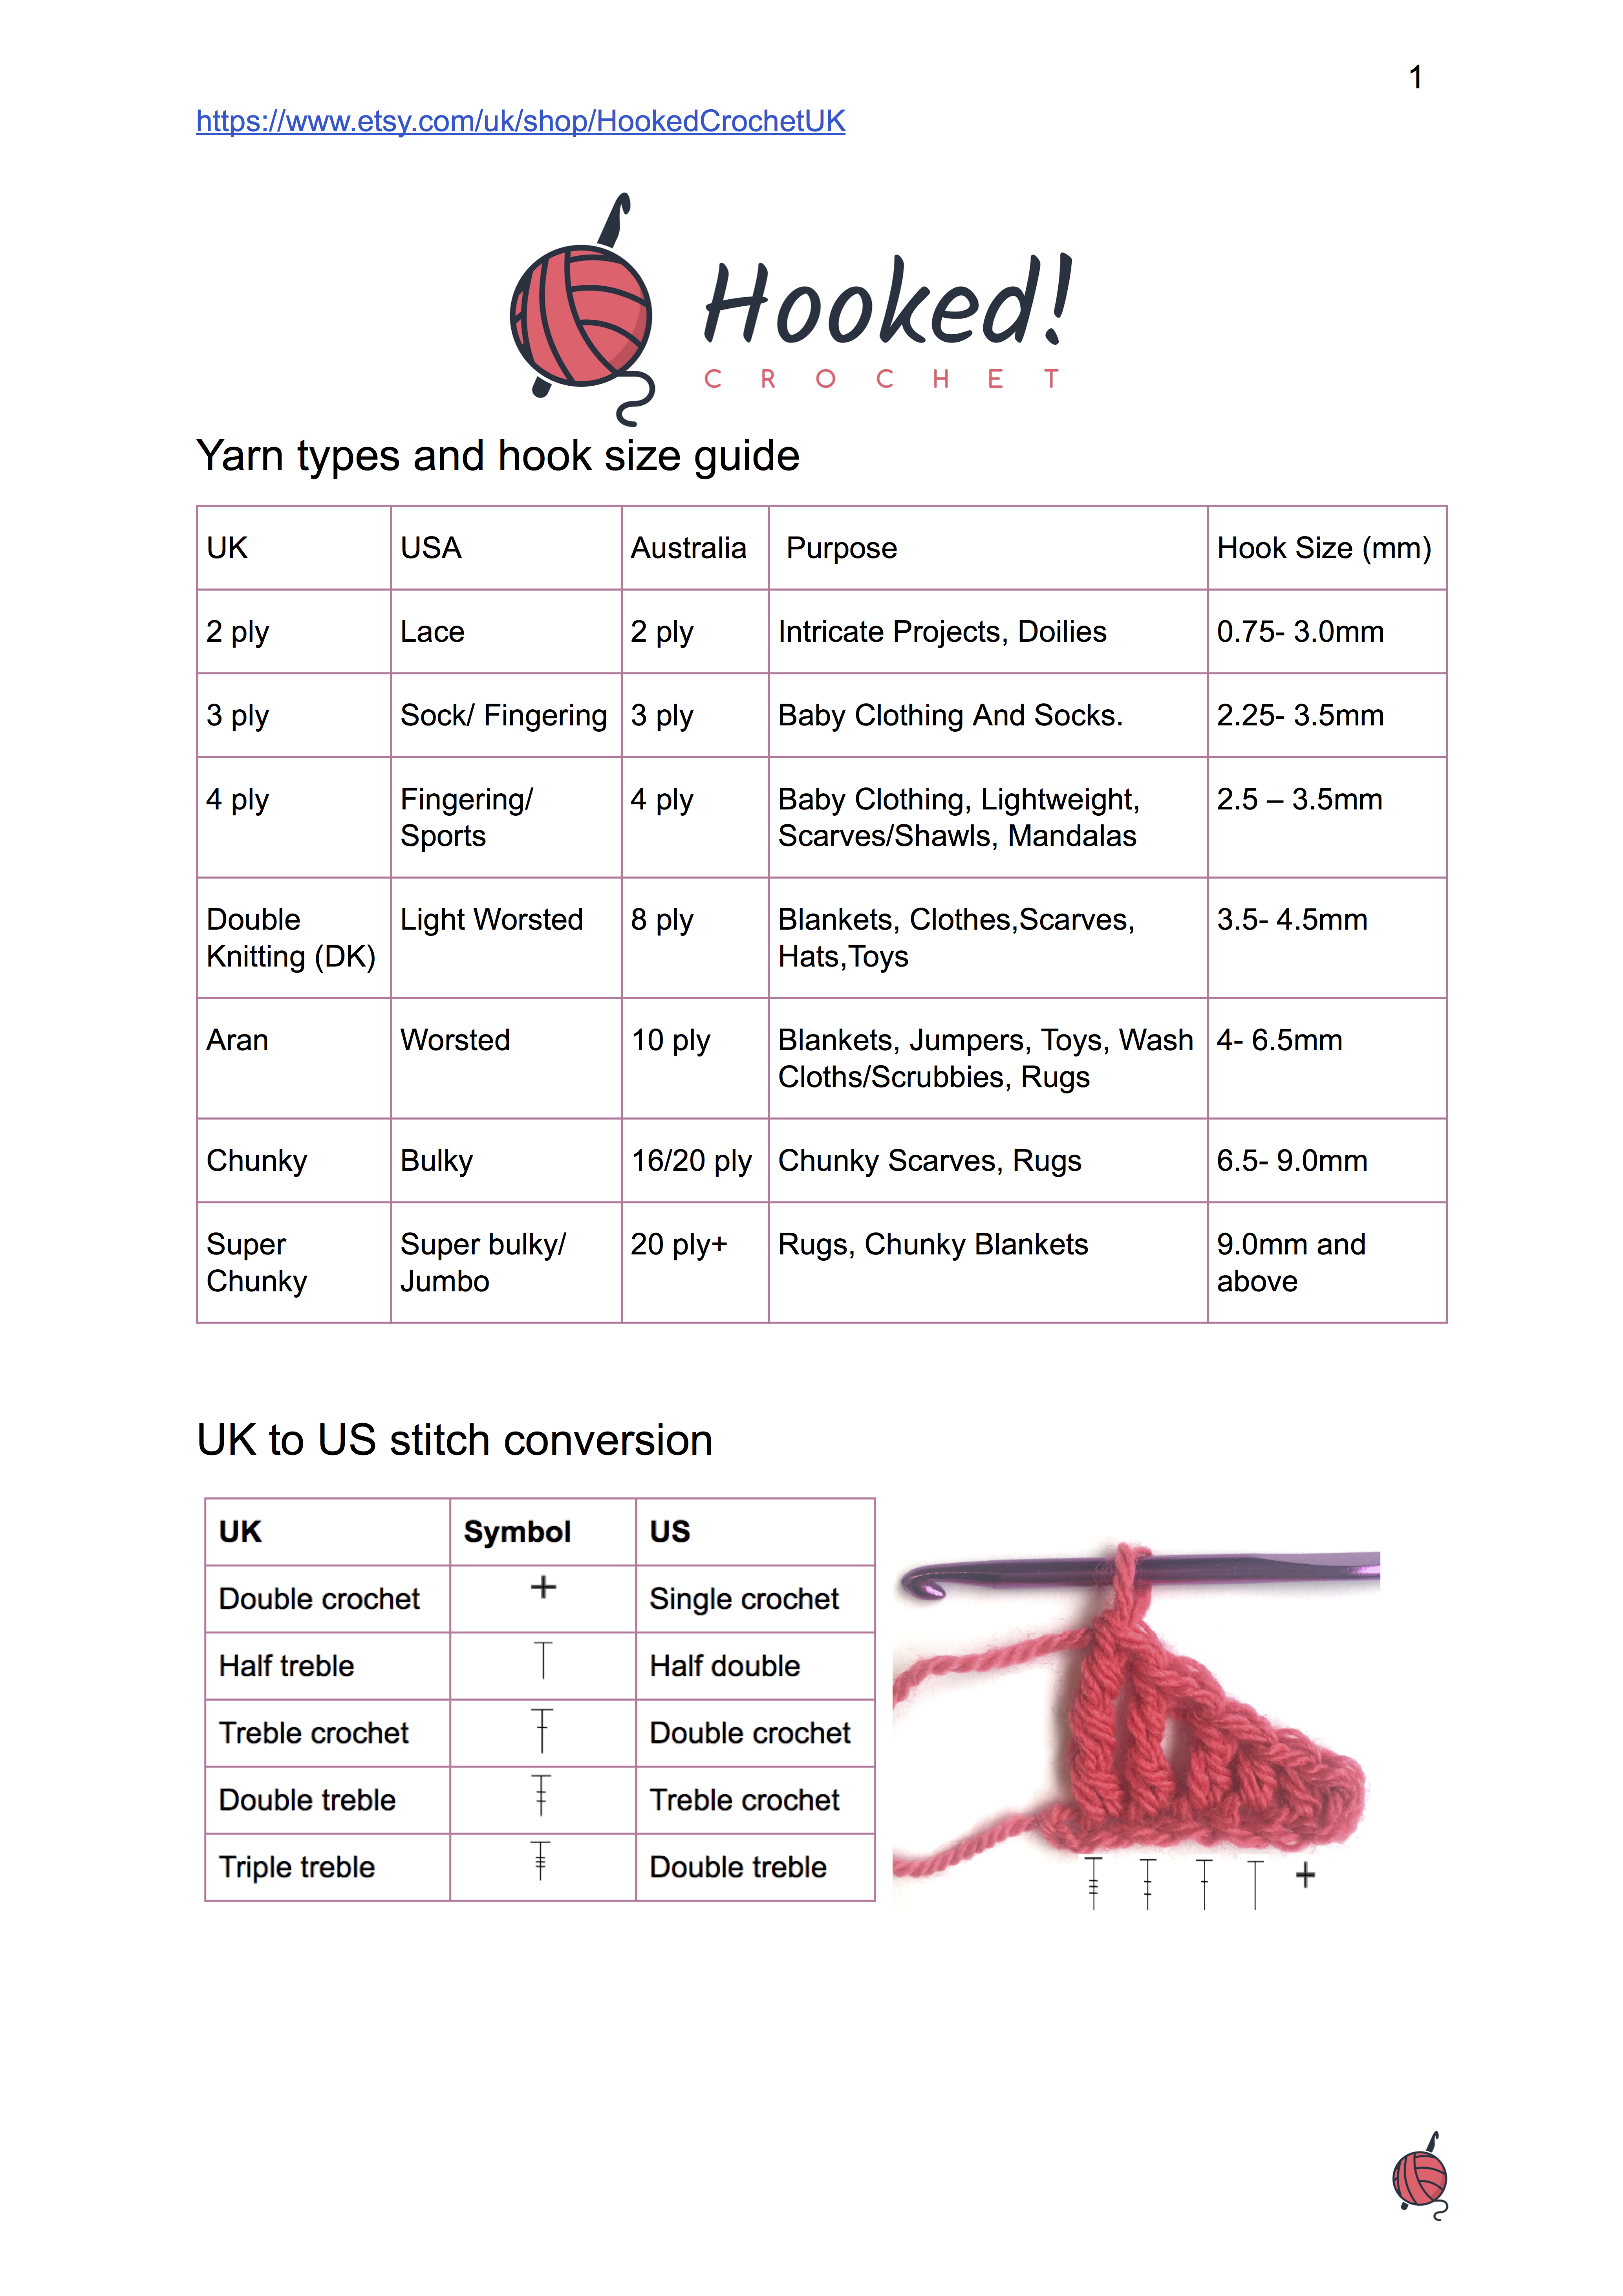 Yarn types and hook size guide
by https://www.etsy.com/your/shops/HookedCrochetUK/